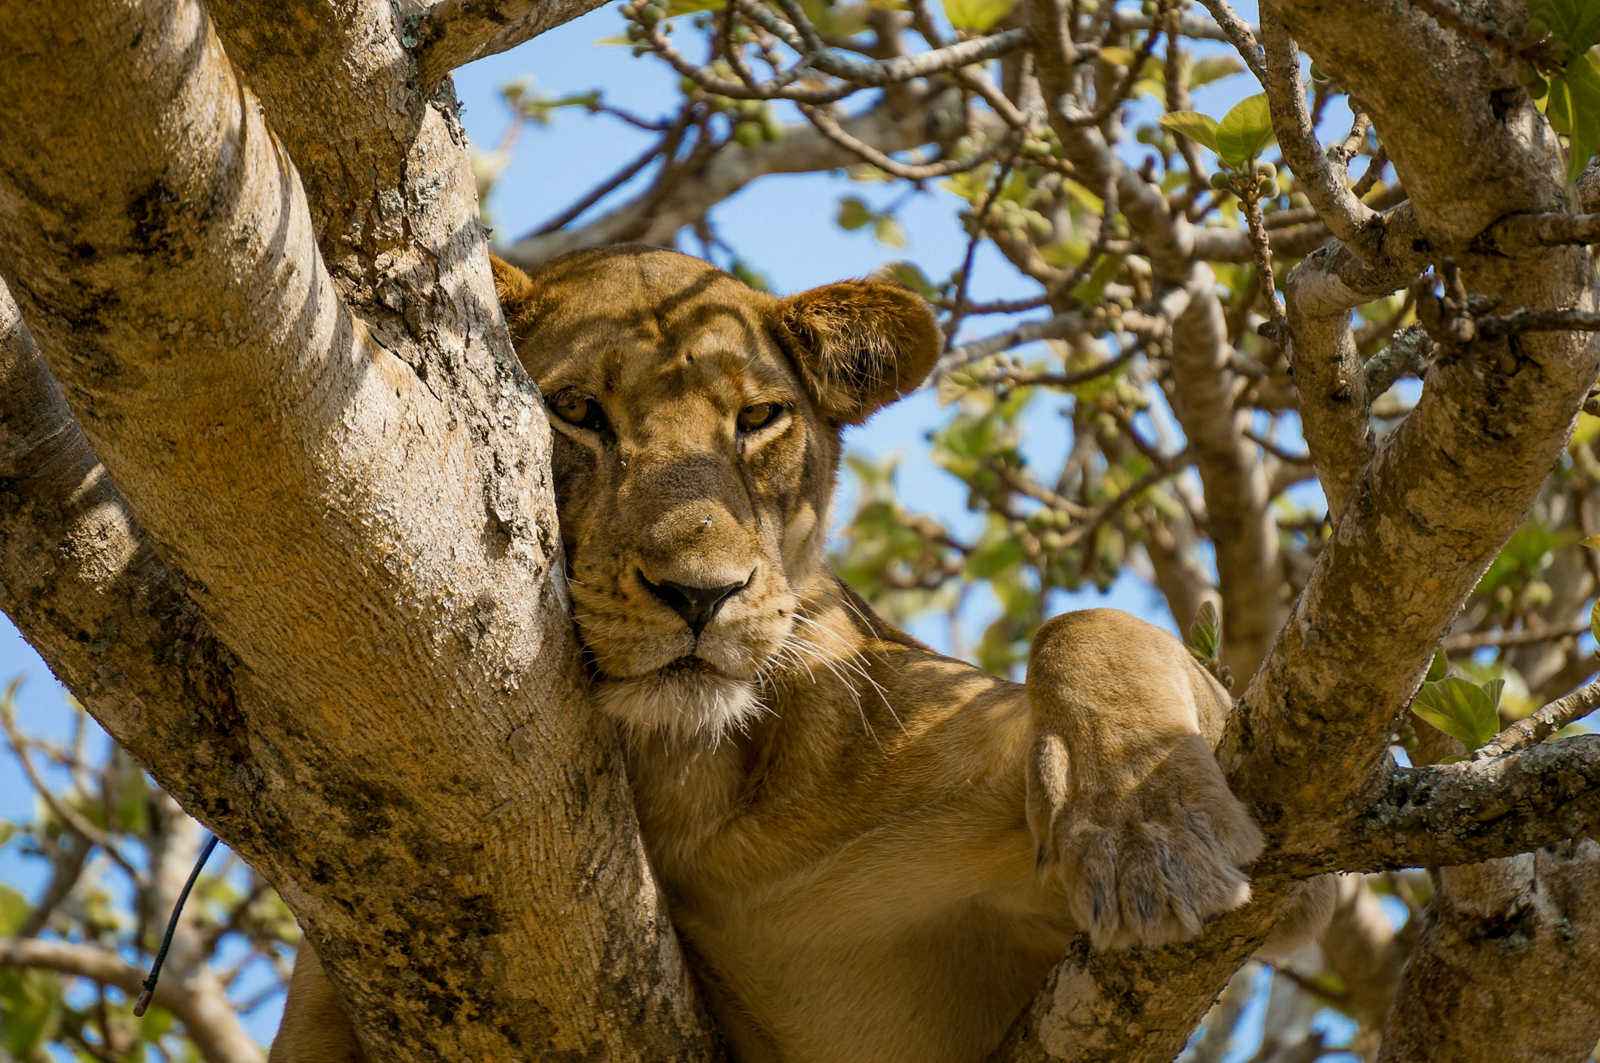 A lioness sleeping in a tree in Queen Elizabeth National Park